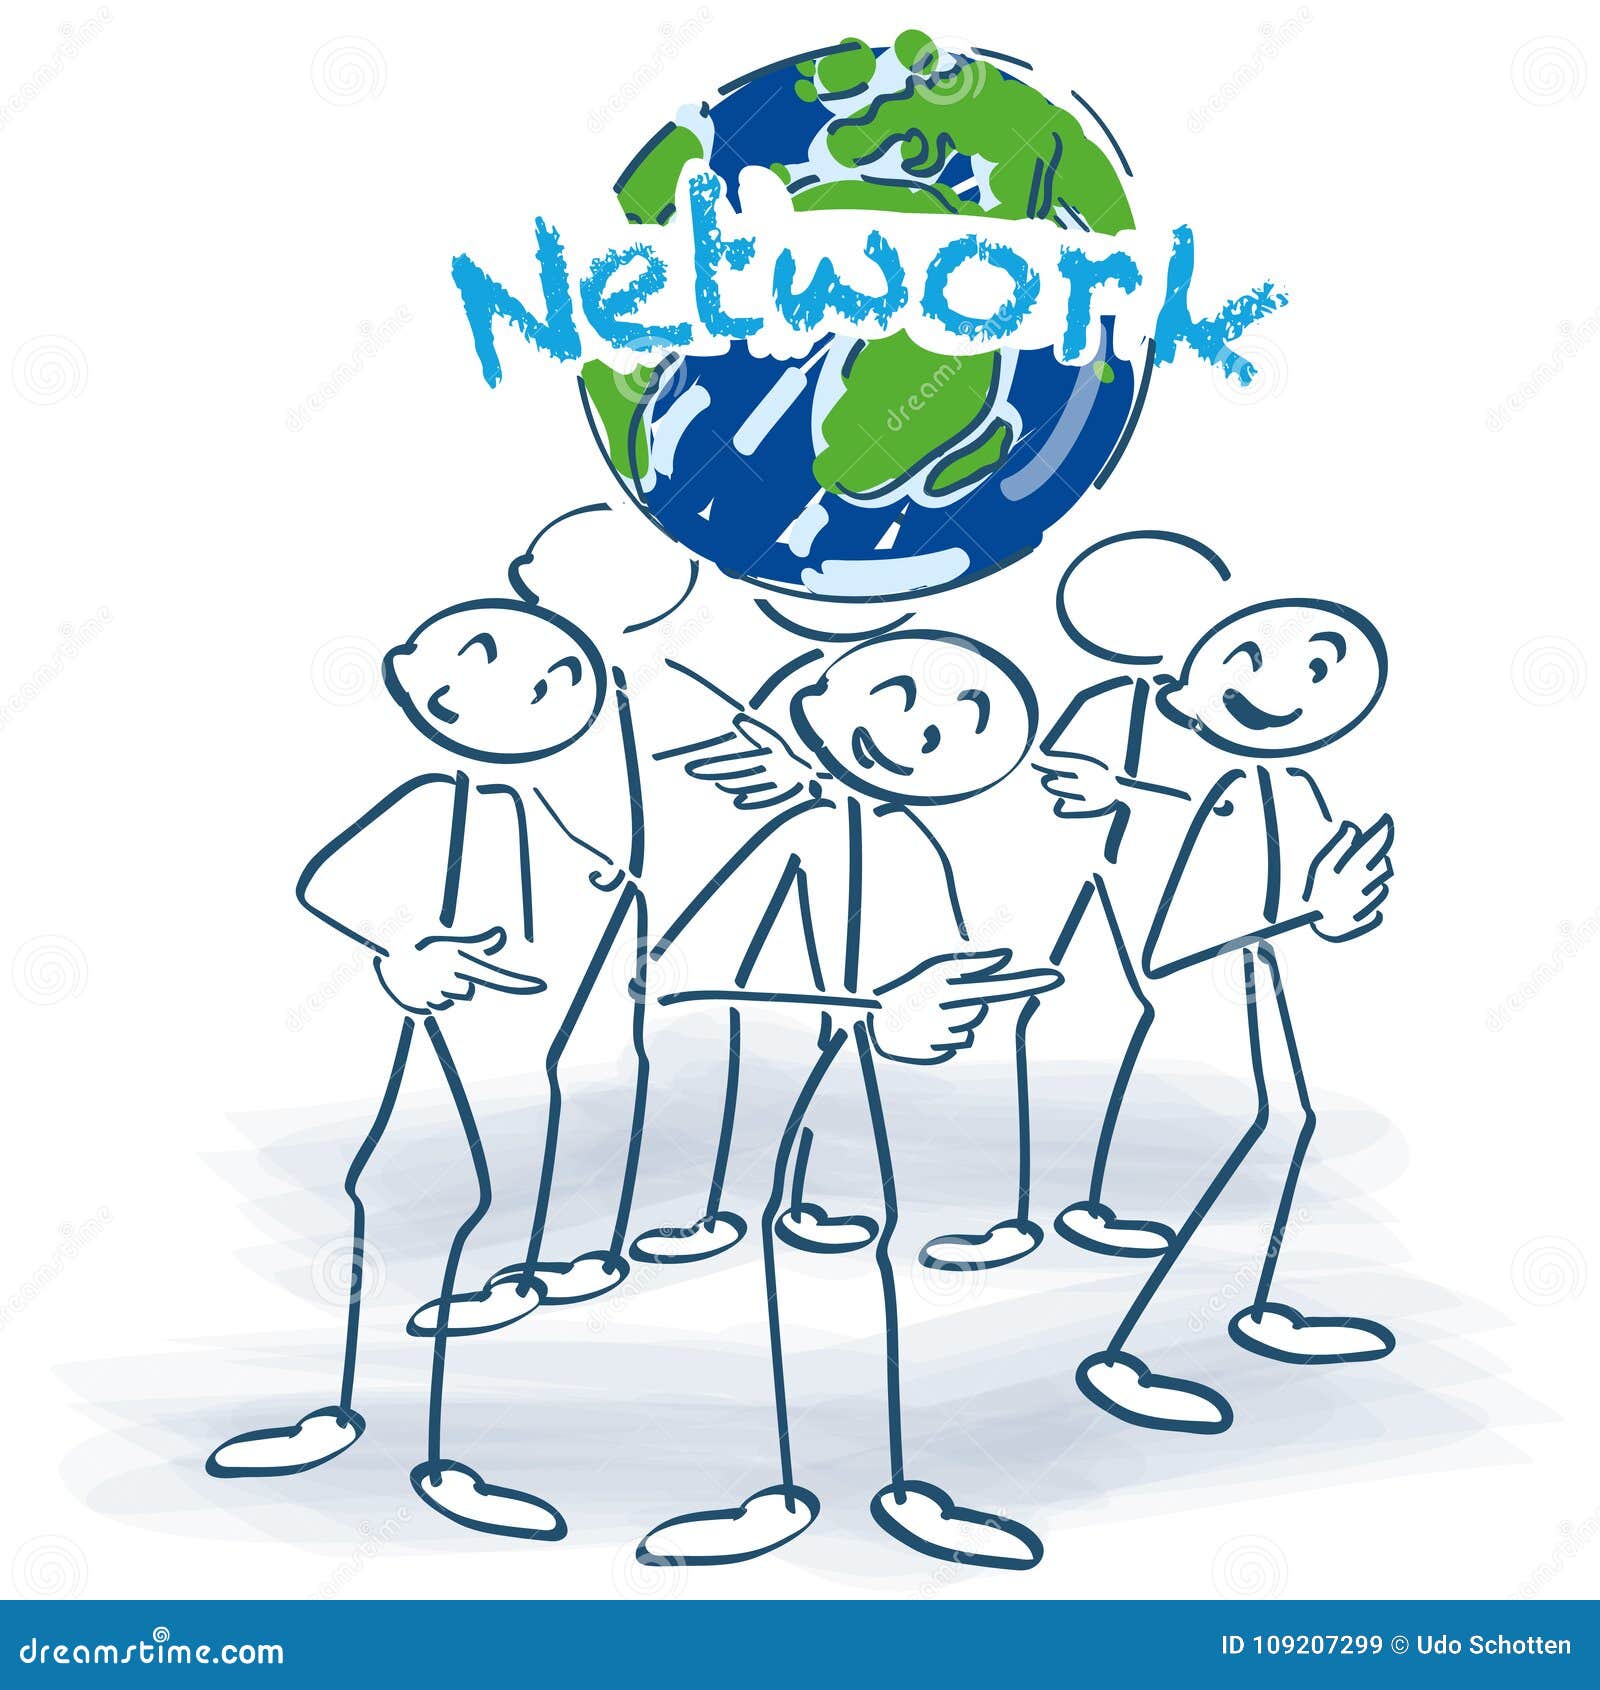 stick figures and network around the world